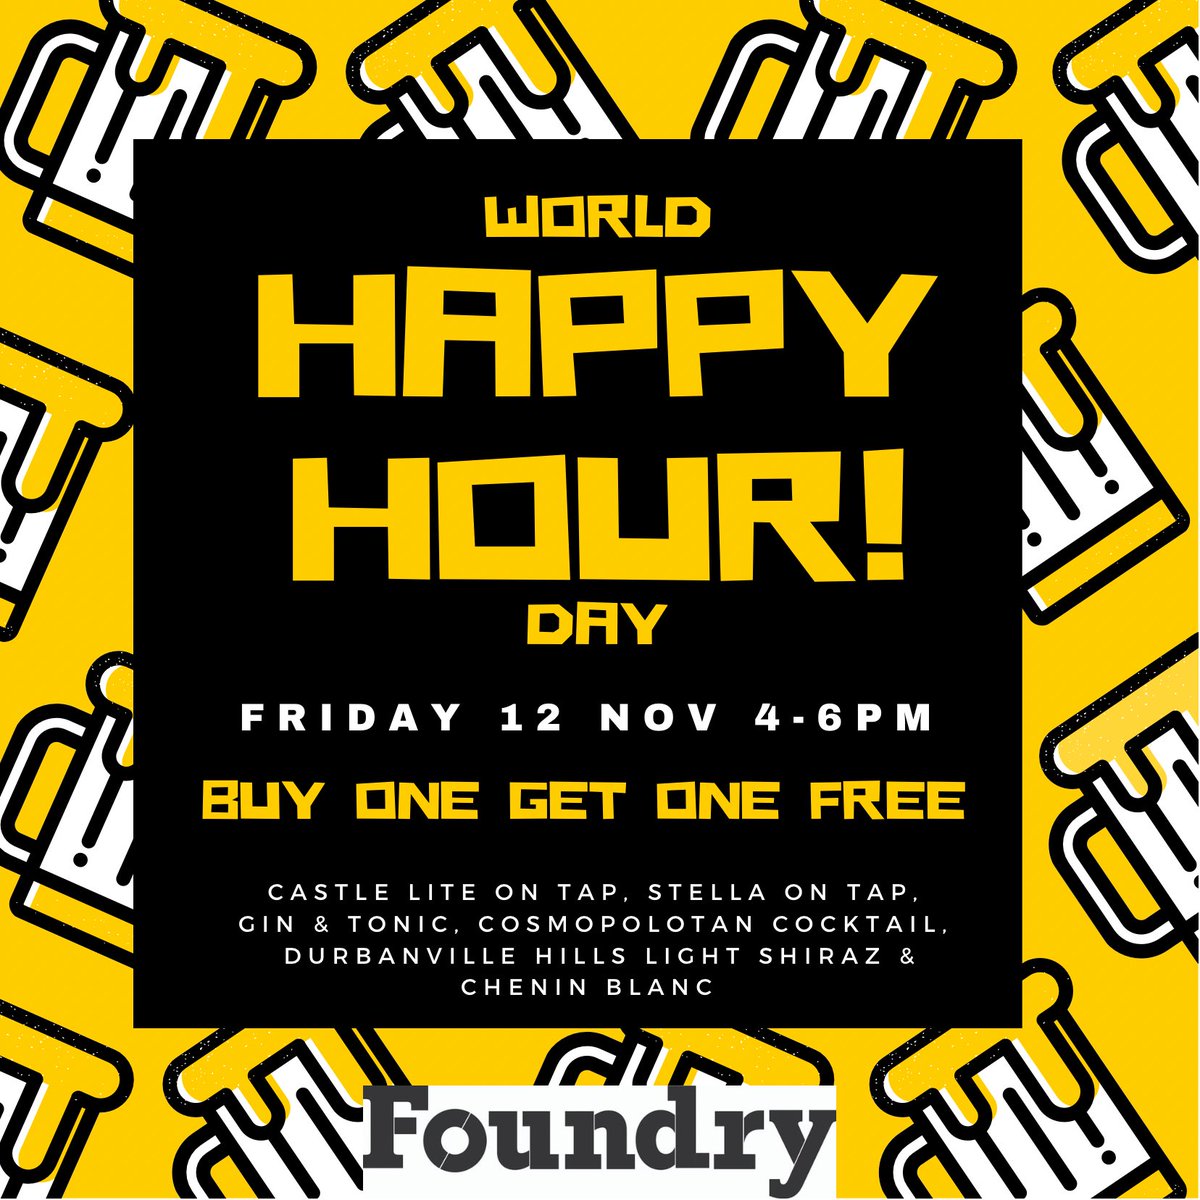 Friday is World Happy Hour Day! Buy one get one Free from 4-6pm at The Foundry… Castle Lite on tap, Stella on tap, Gin& Tonic, Cosmopolitan cocktail, Durbanville Hills Wine lIght shiraz & light chenin blanc. #foundryjozi #HappyHour